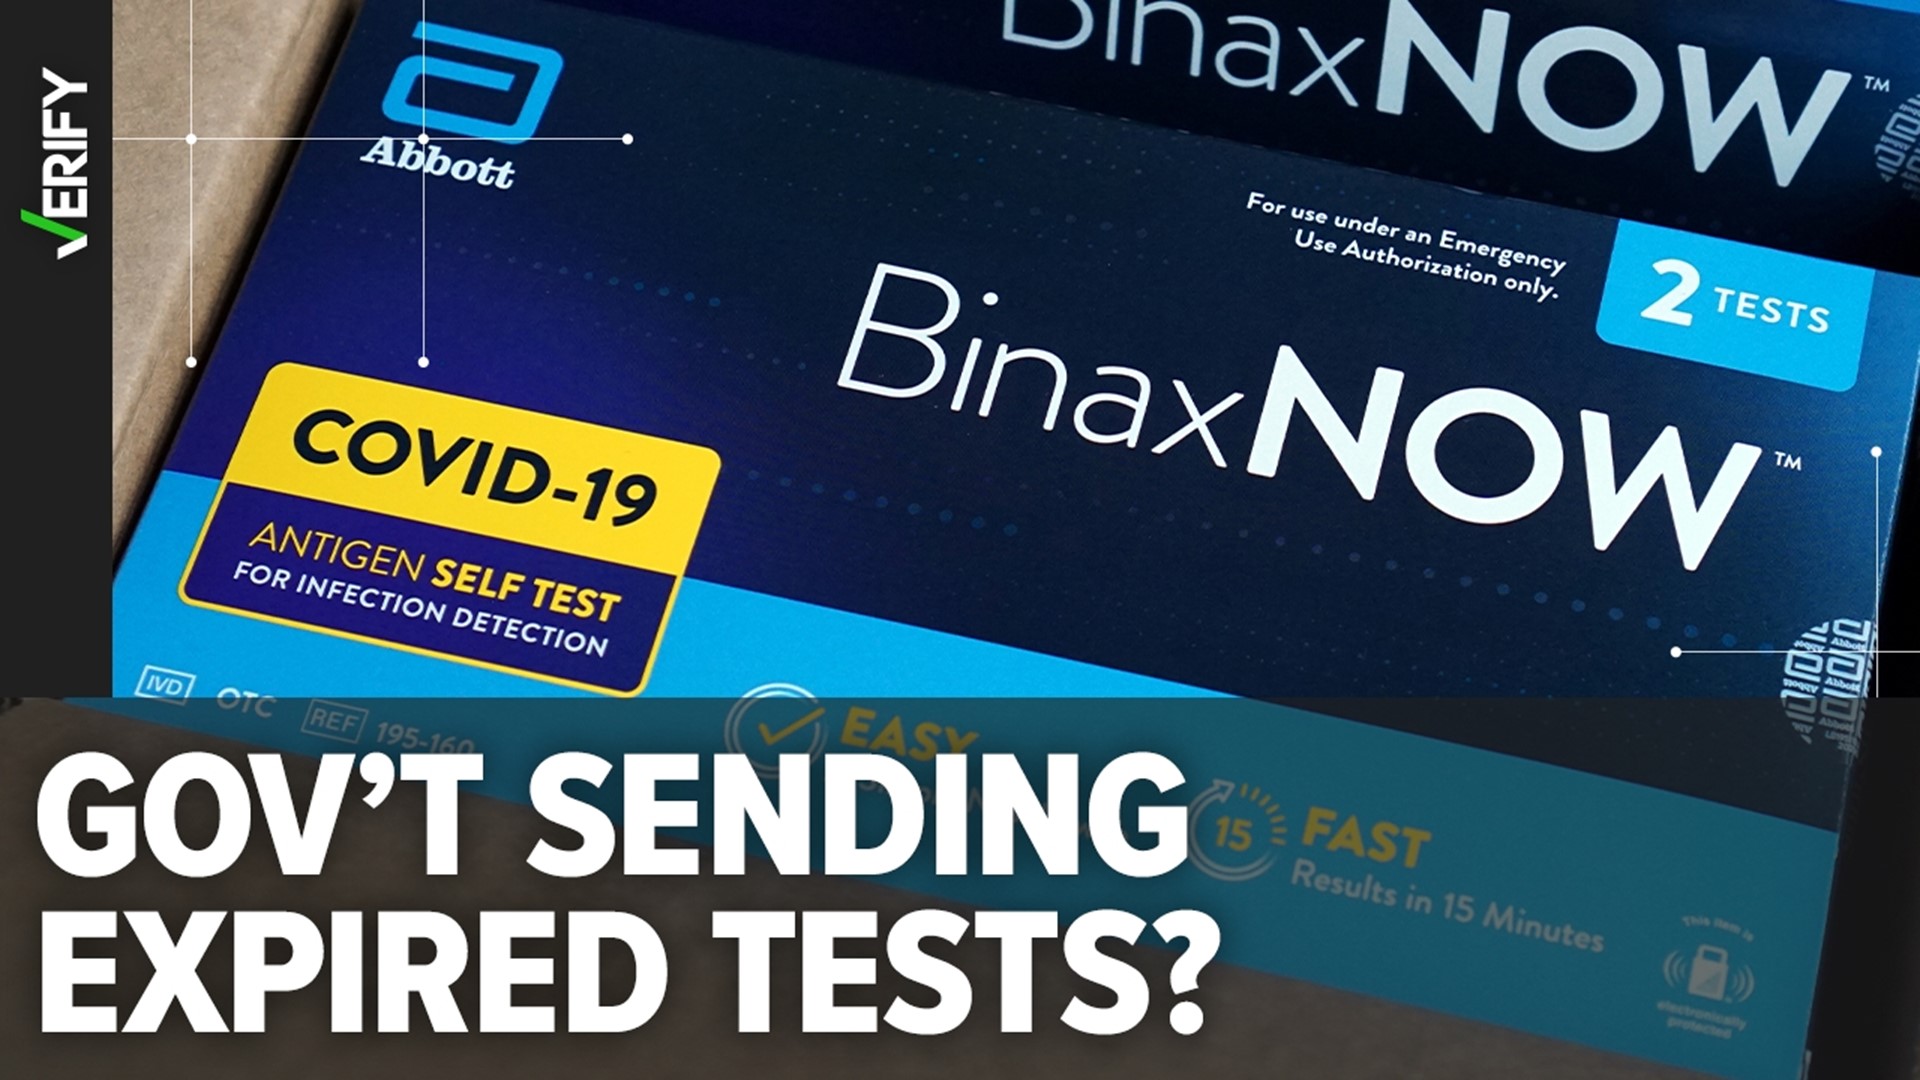 Free COVID-19 testing kits mailed out by the federal government are still usable. The FDA has extended the expiration dates for most COVID-19 tests